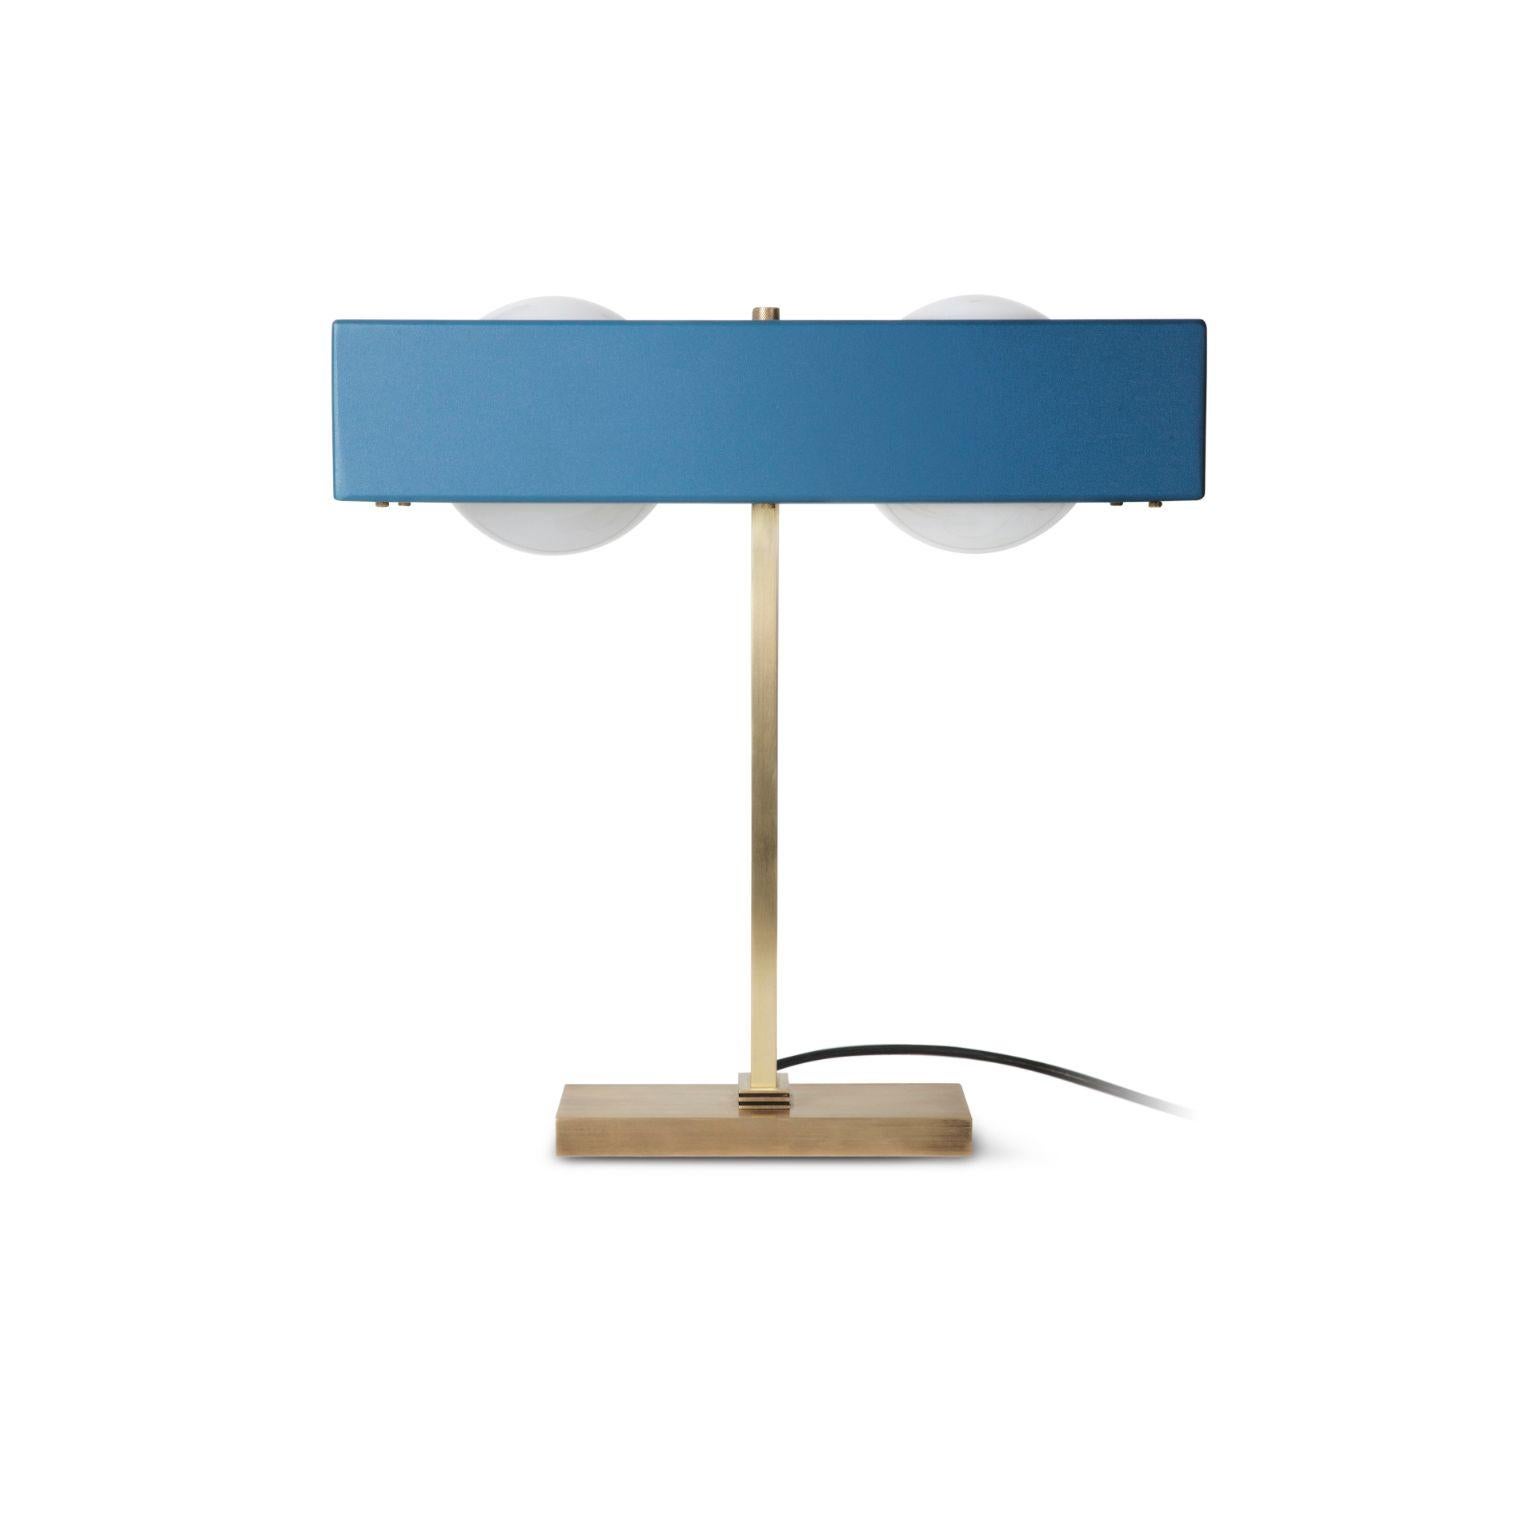 Kernel table light - blue by Bert Frank.
Dimensions: 41.5 x 40 x 24 cm.
Materials: Brass, steel.

Brushed brass lacquered as standard, custom finishes available.

When Adam Yeats and Robbie Llewellyn founded Bert Frank in 2013 it was a meeting of